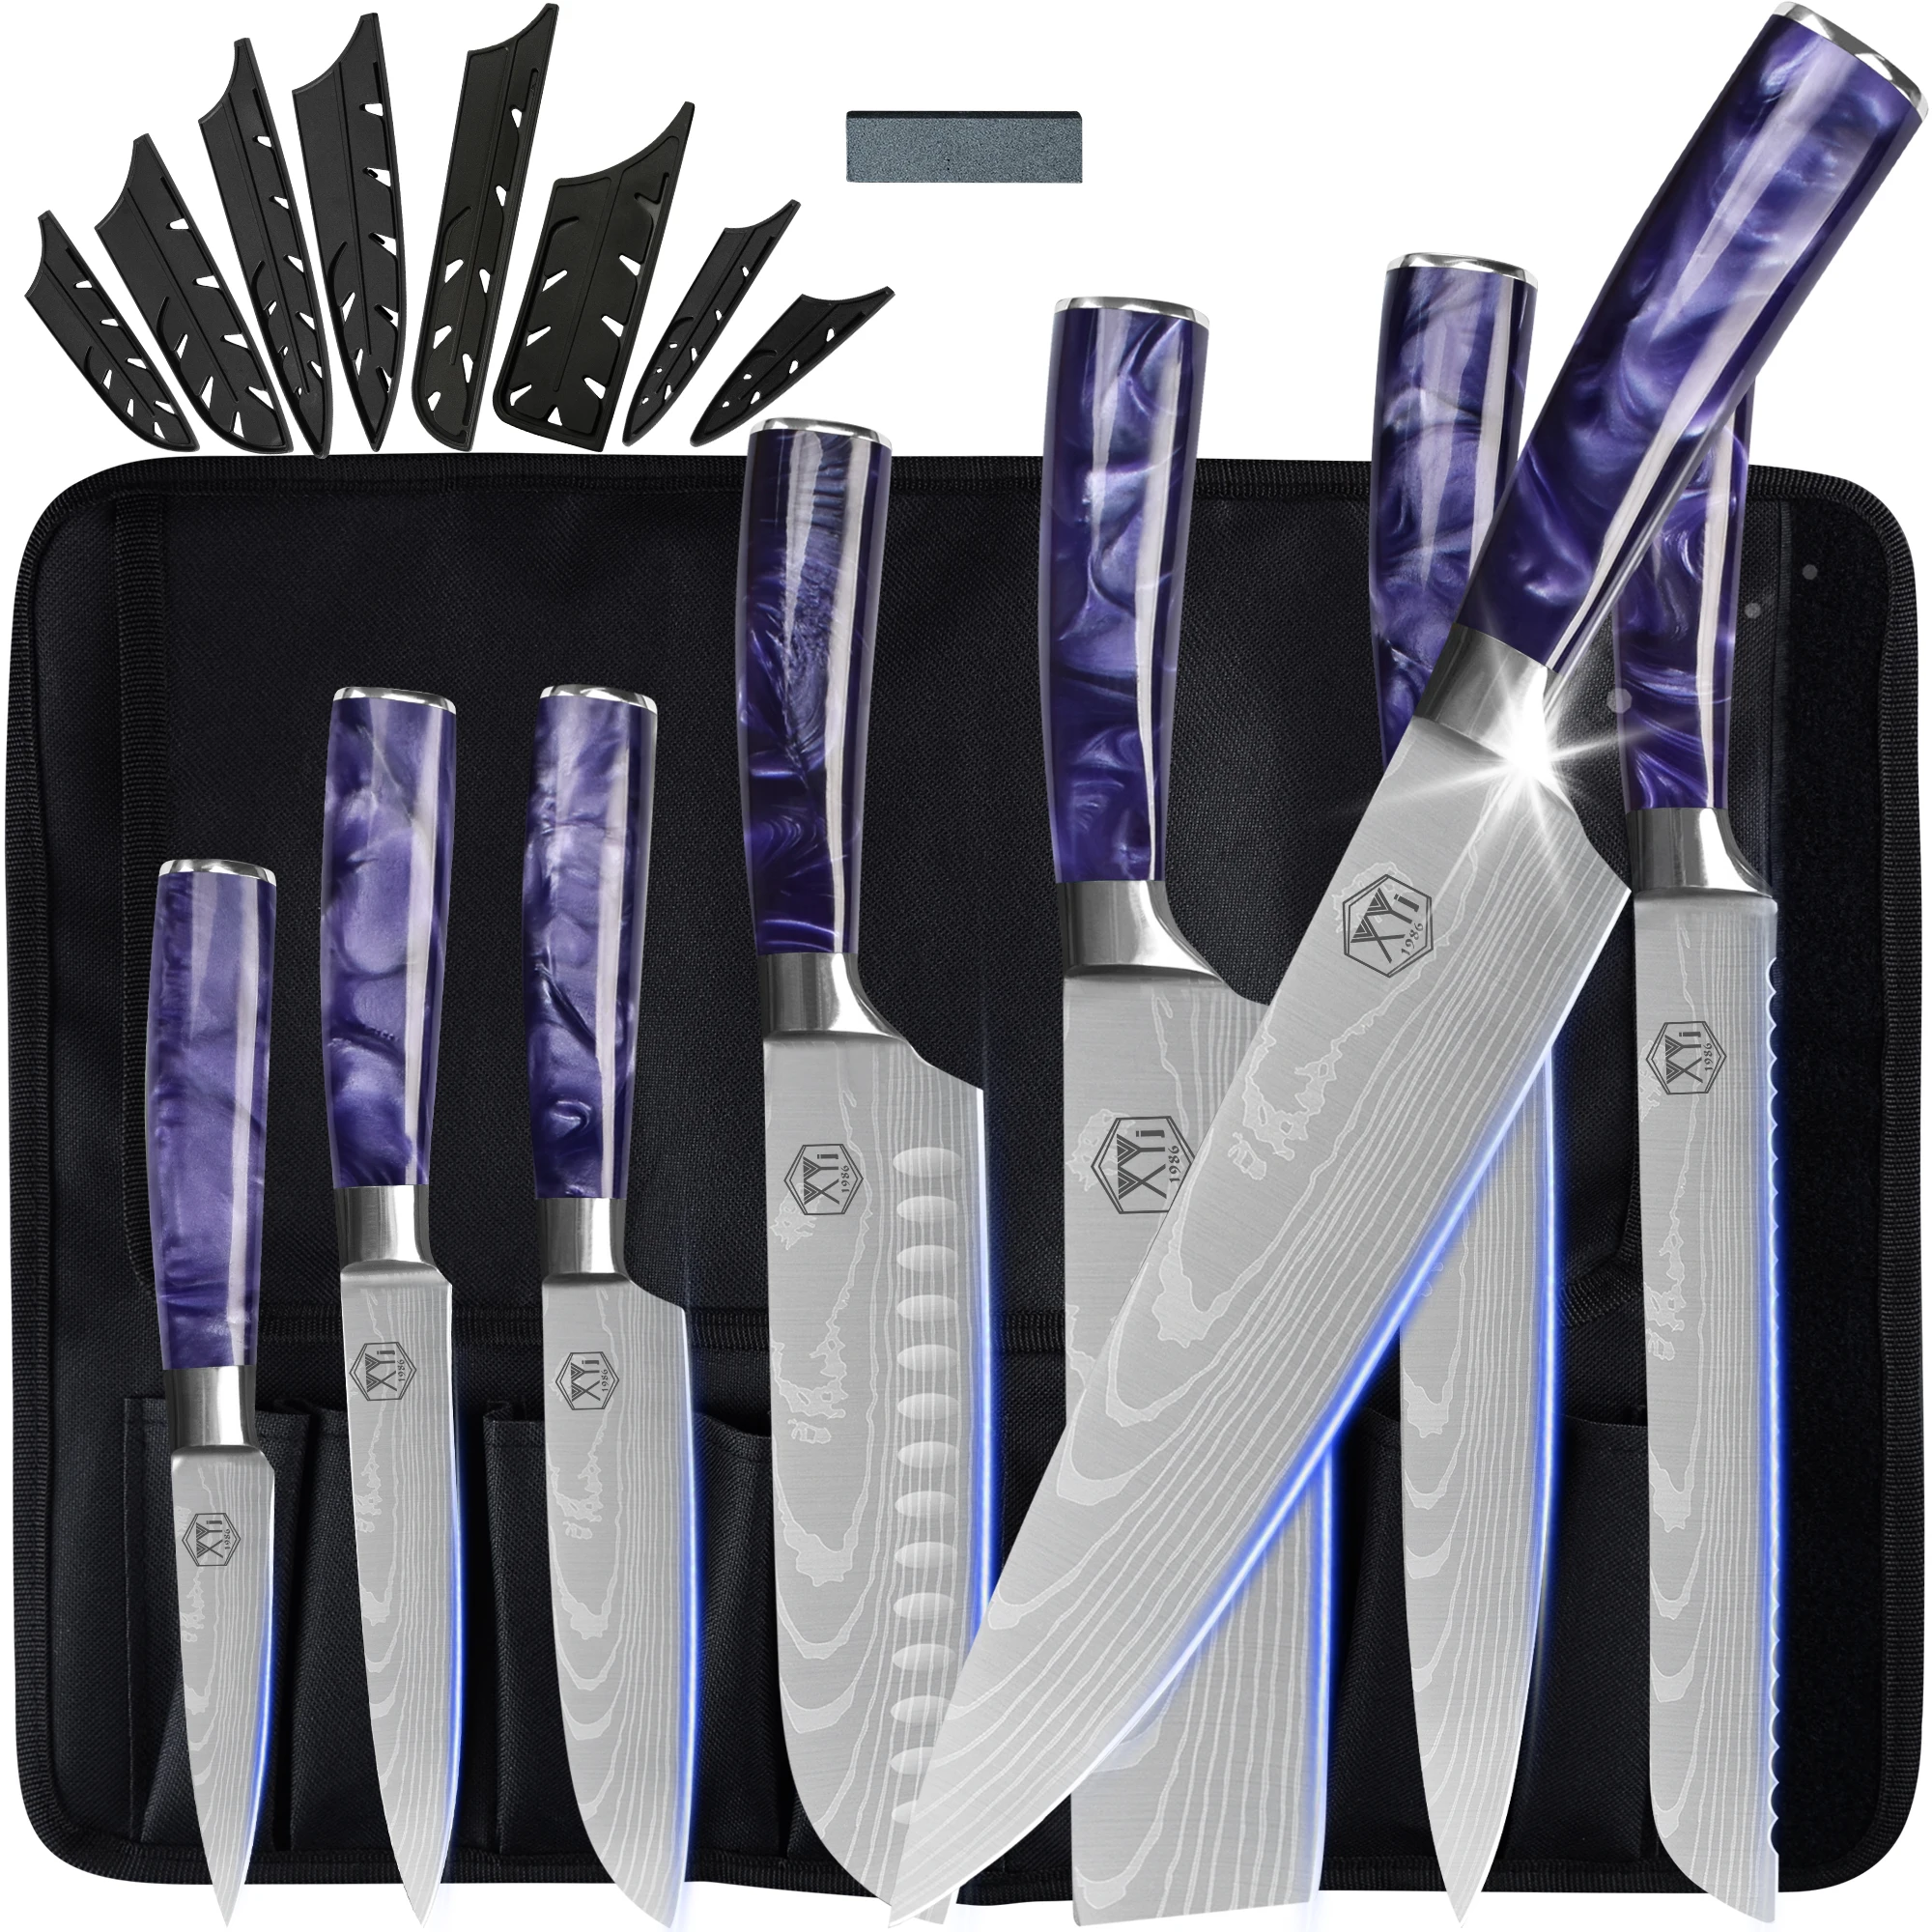 

Xyj 8 Pieces Stainless Steel Laser Blade Kitchen Knives Set Resin Handle Chef Slicing Knife With Bag Sharpening Rod Whetstone